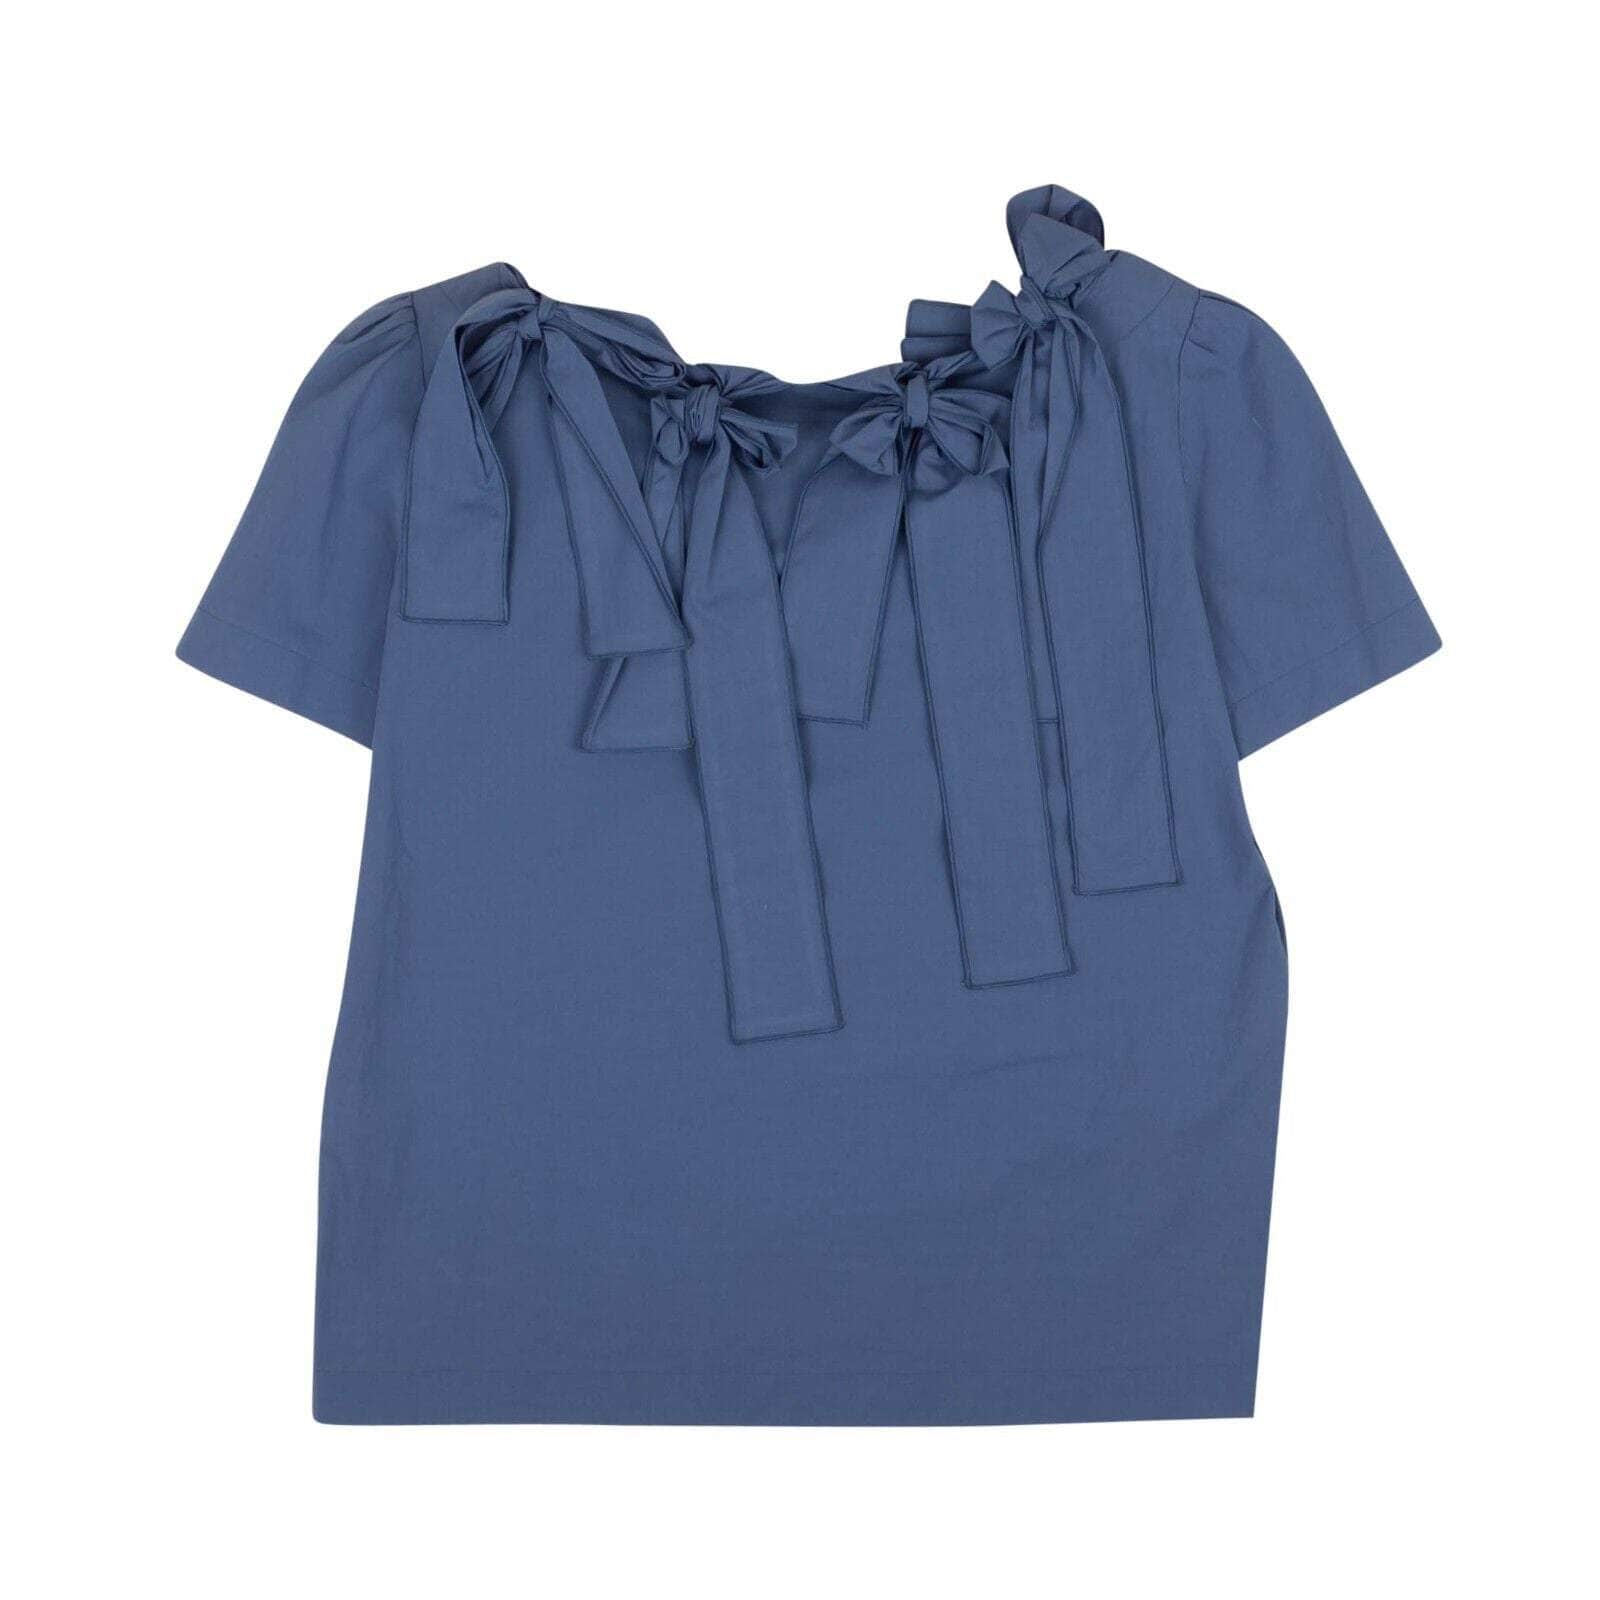 BOUTIQUE MOSCHINO Blue Bow Accented Short Sleeve Blouse